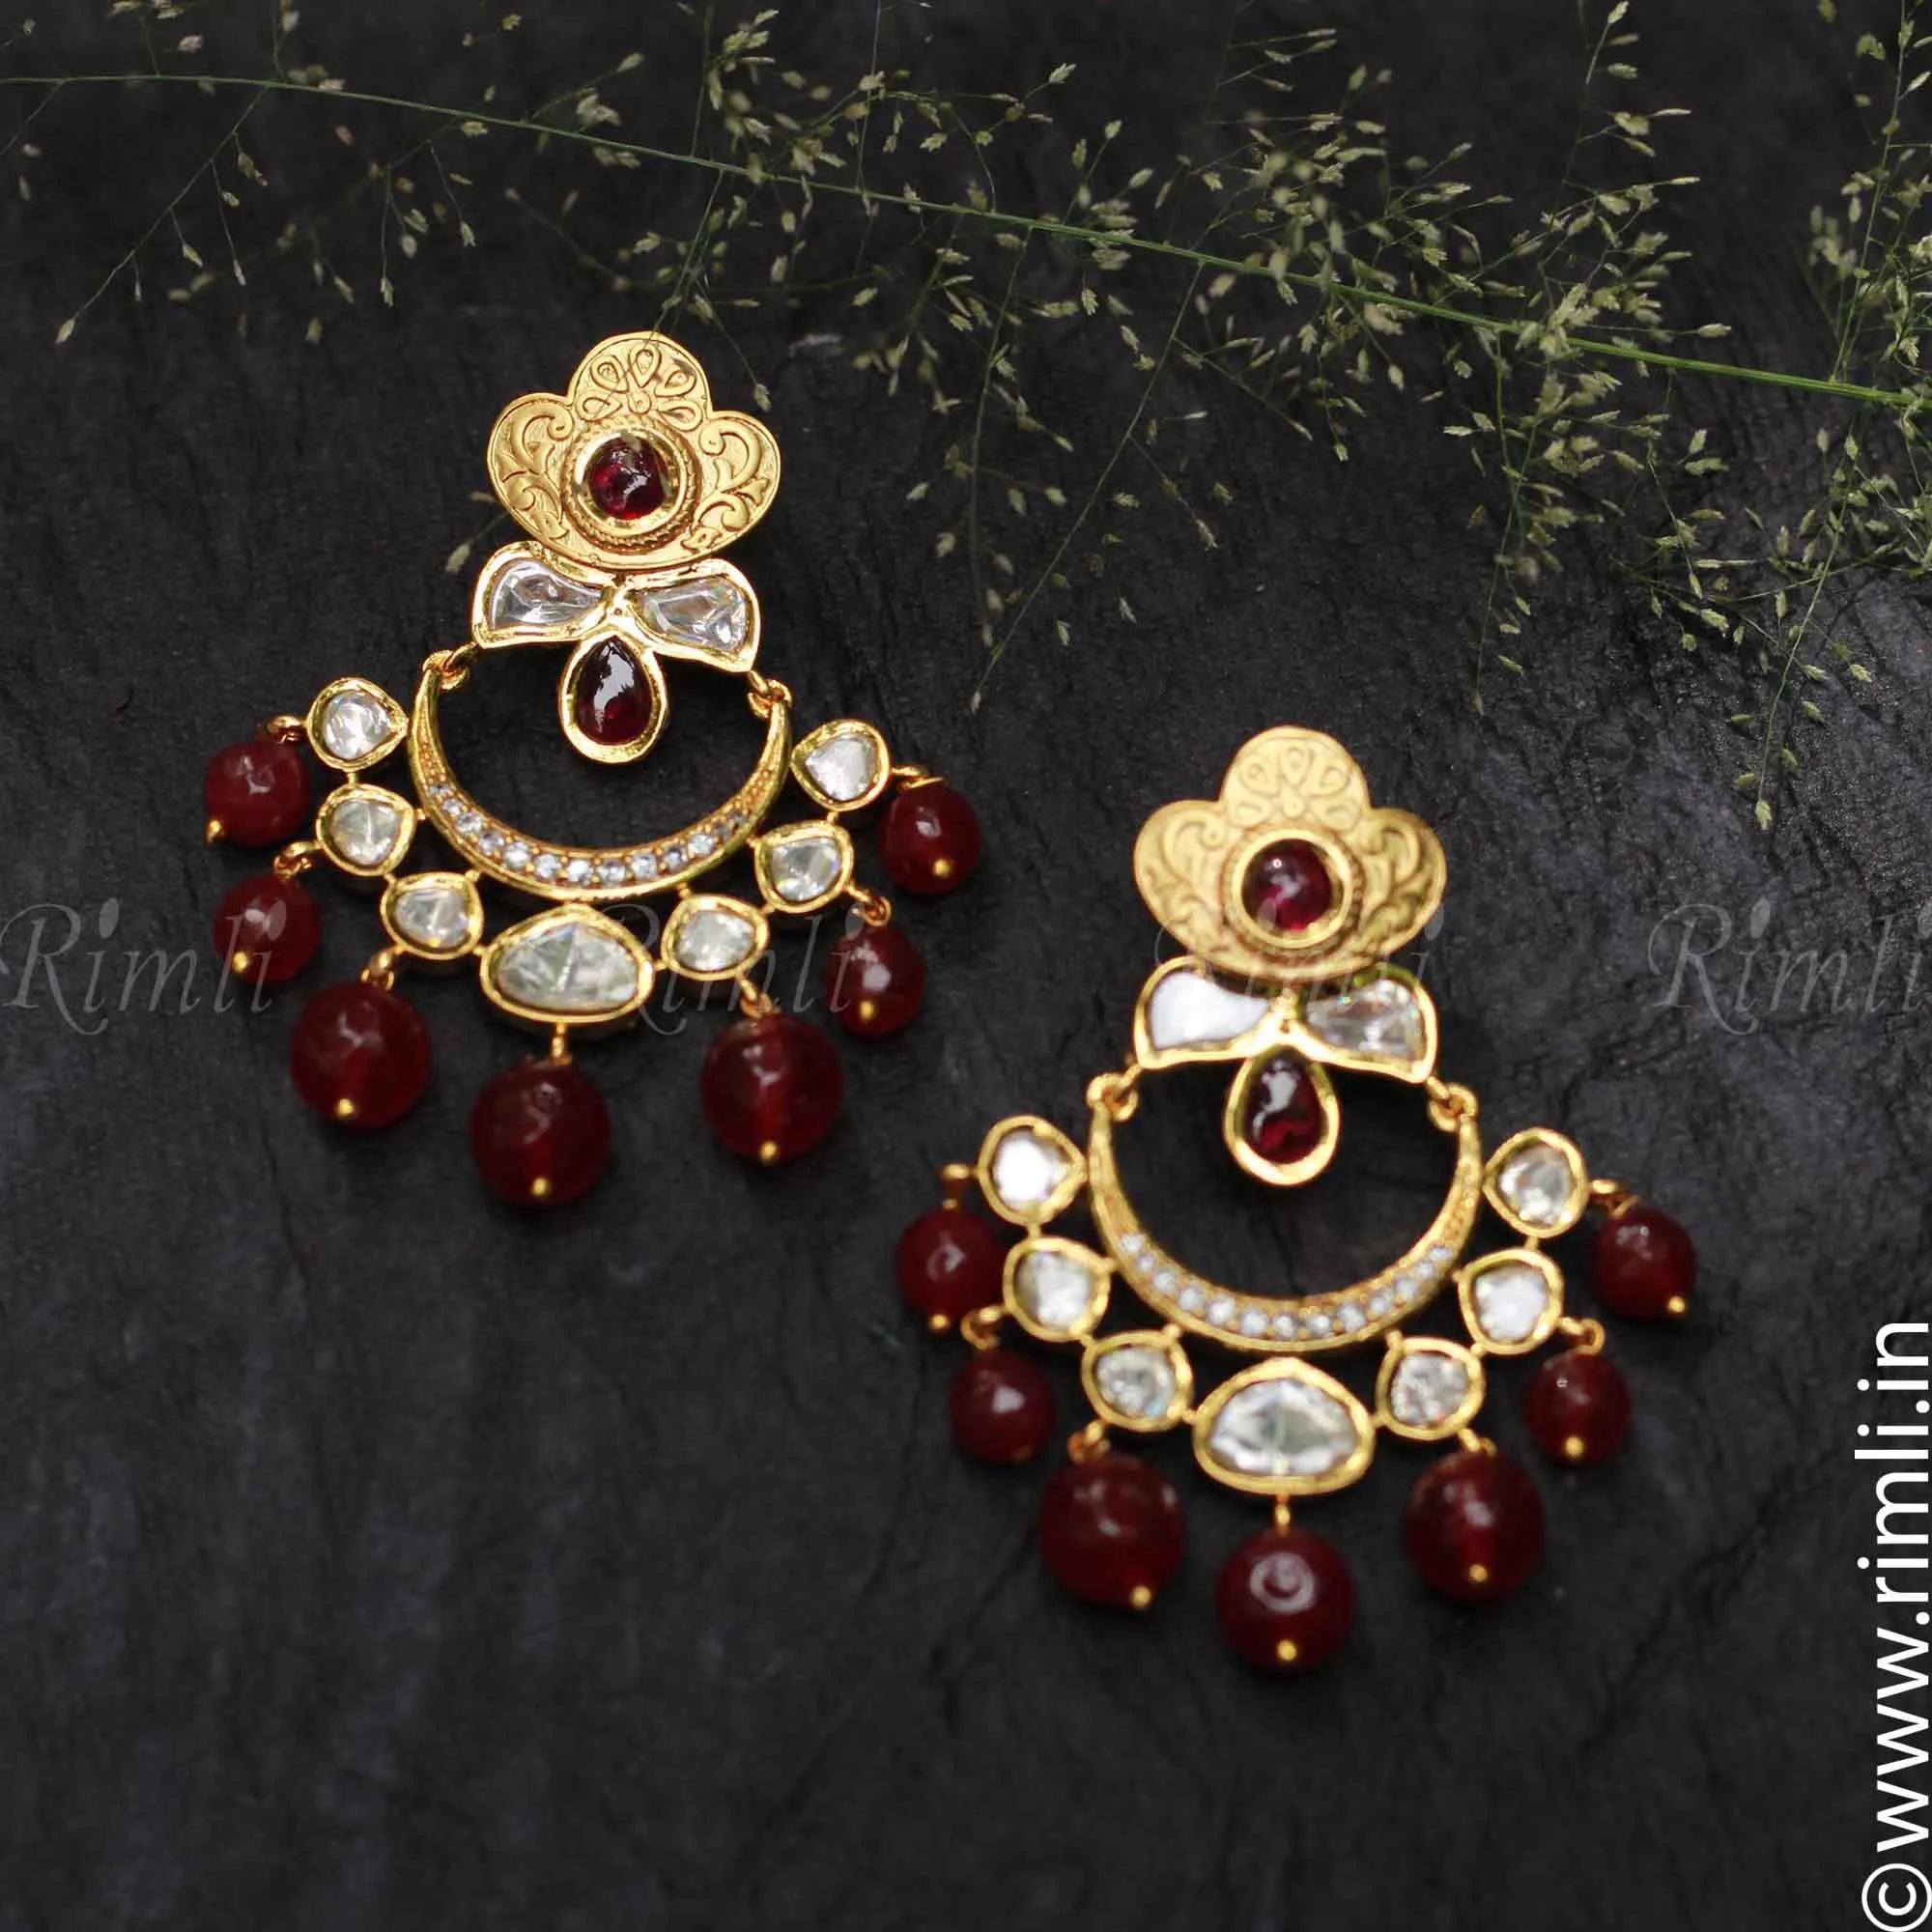 Chandbali Earrings Handcrafted With White Maroon Stones.